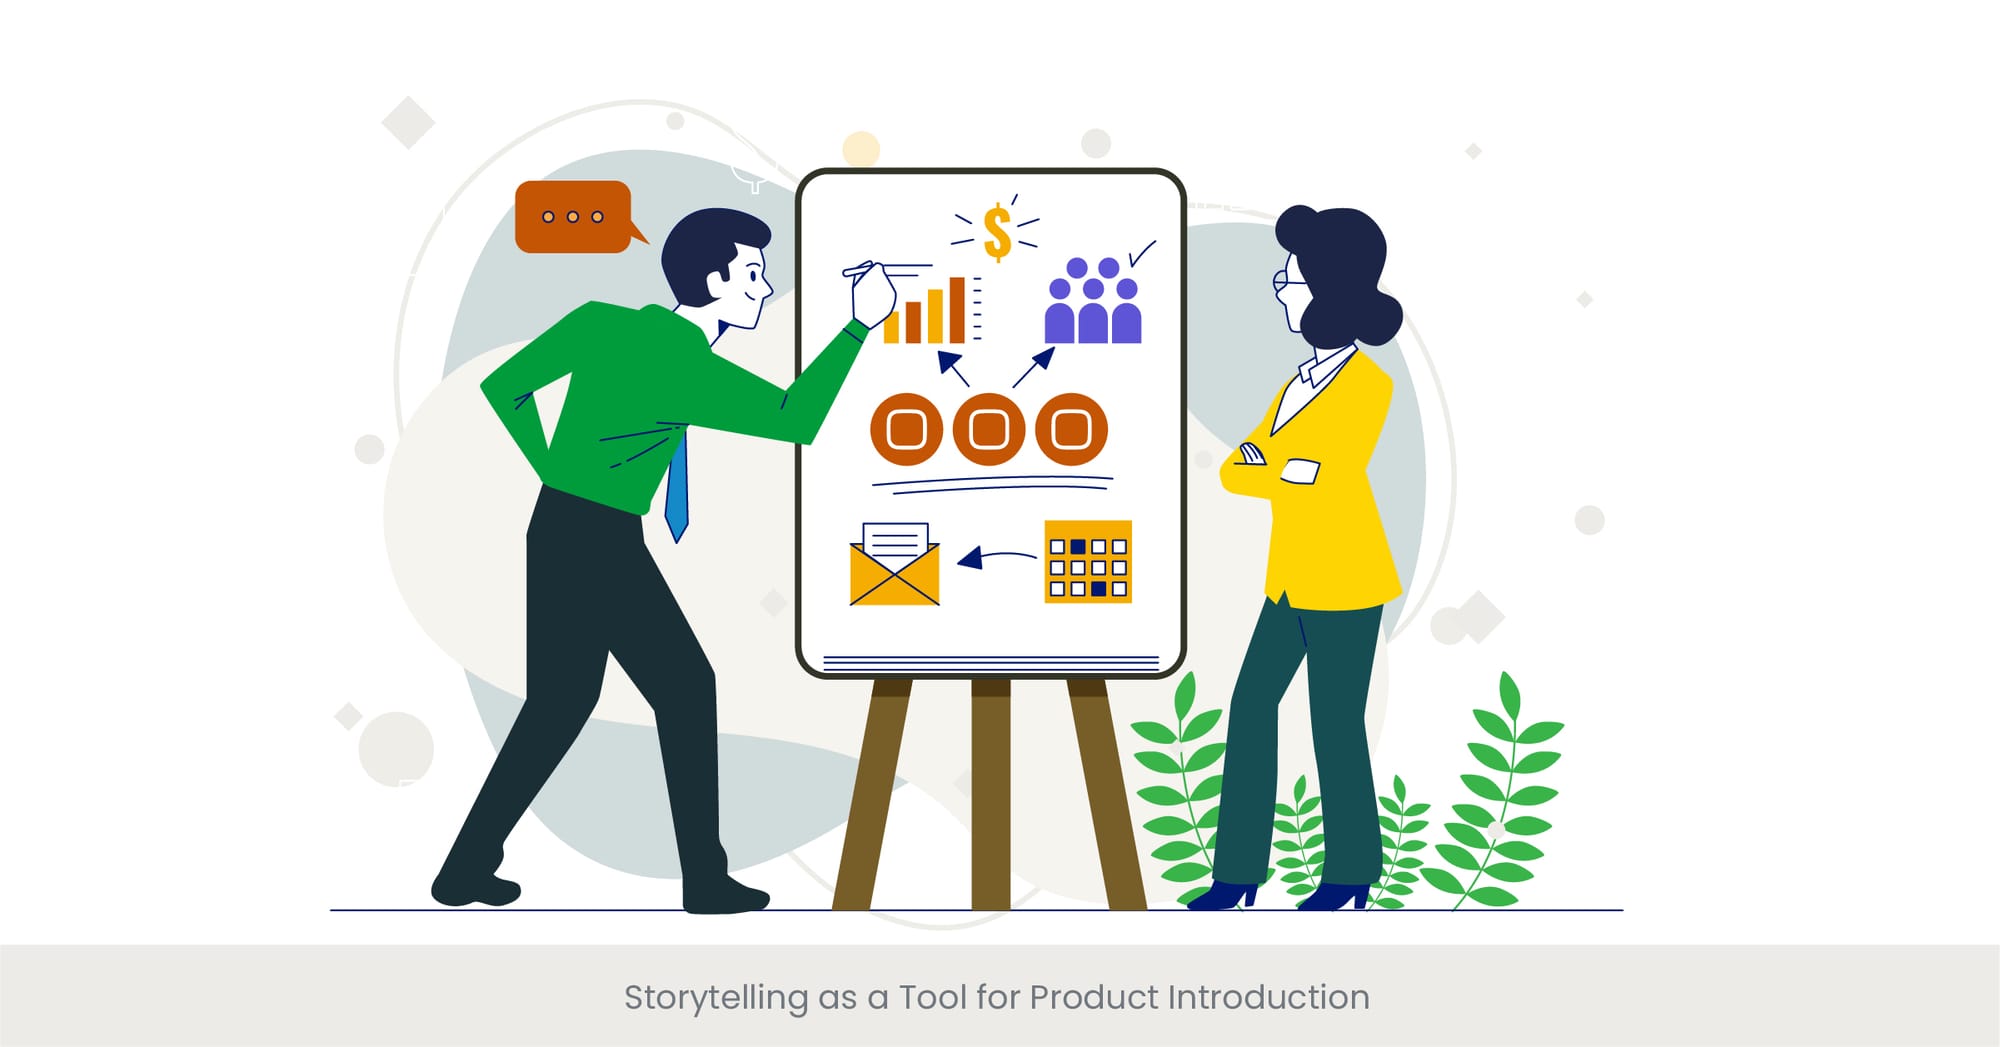 Storytelling as a Tool for Product Introduction